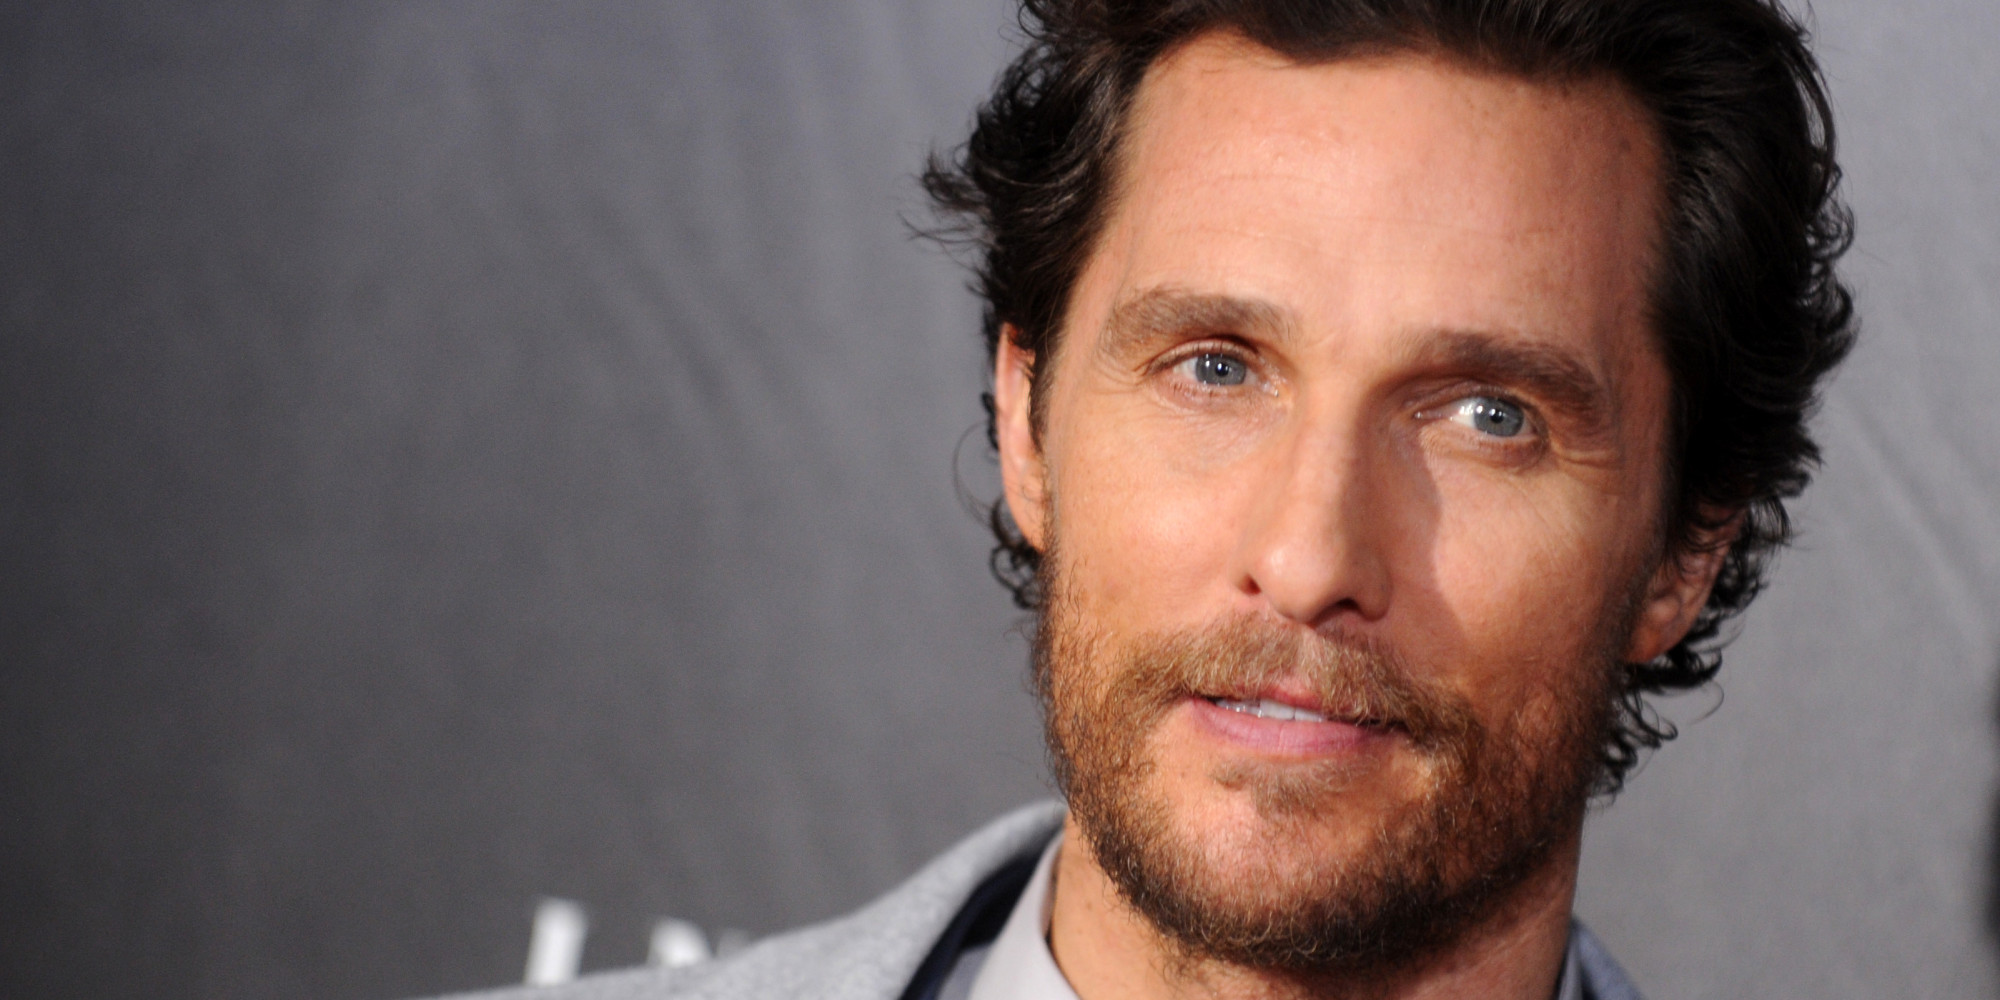 Matthew McConaughey attends the 'Interstellar' premiere at AMC Lincoln Square Theater in New York on November 3, 2014.